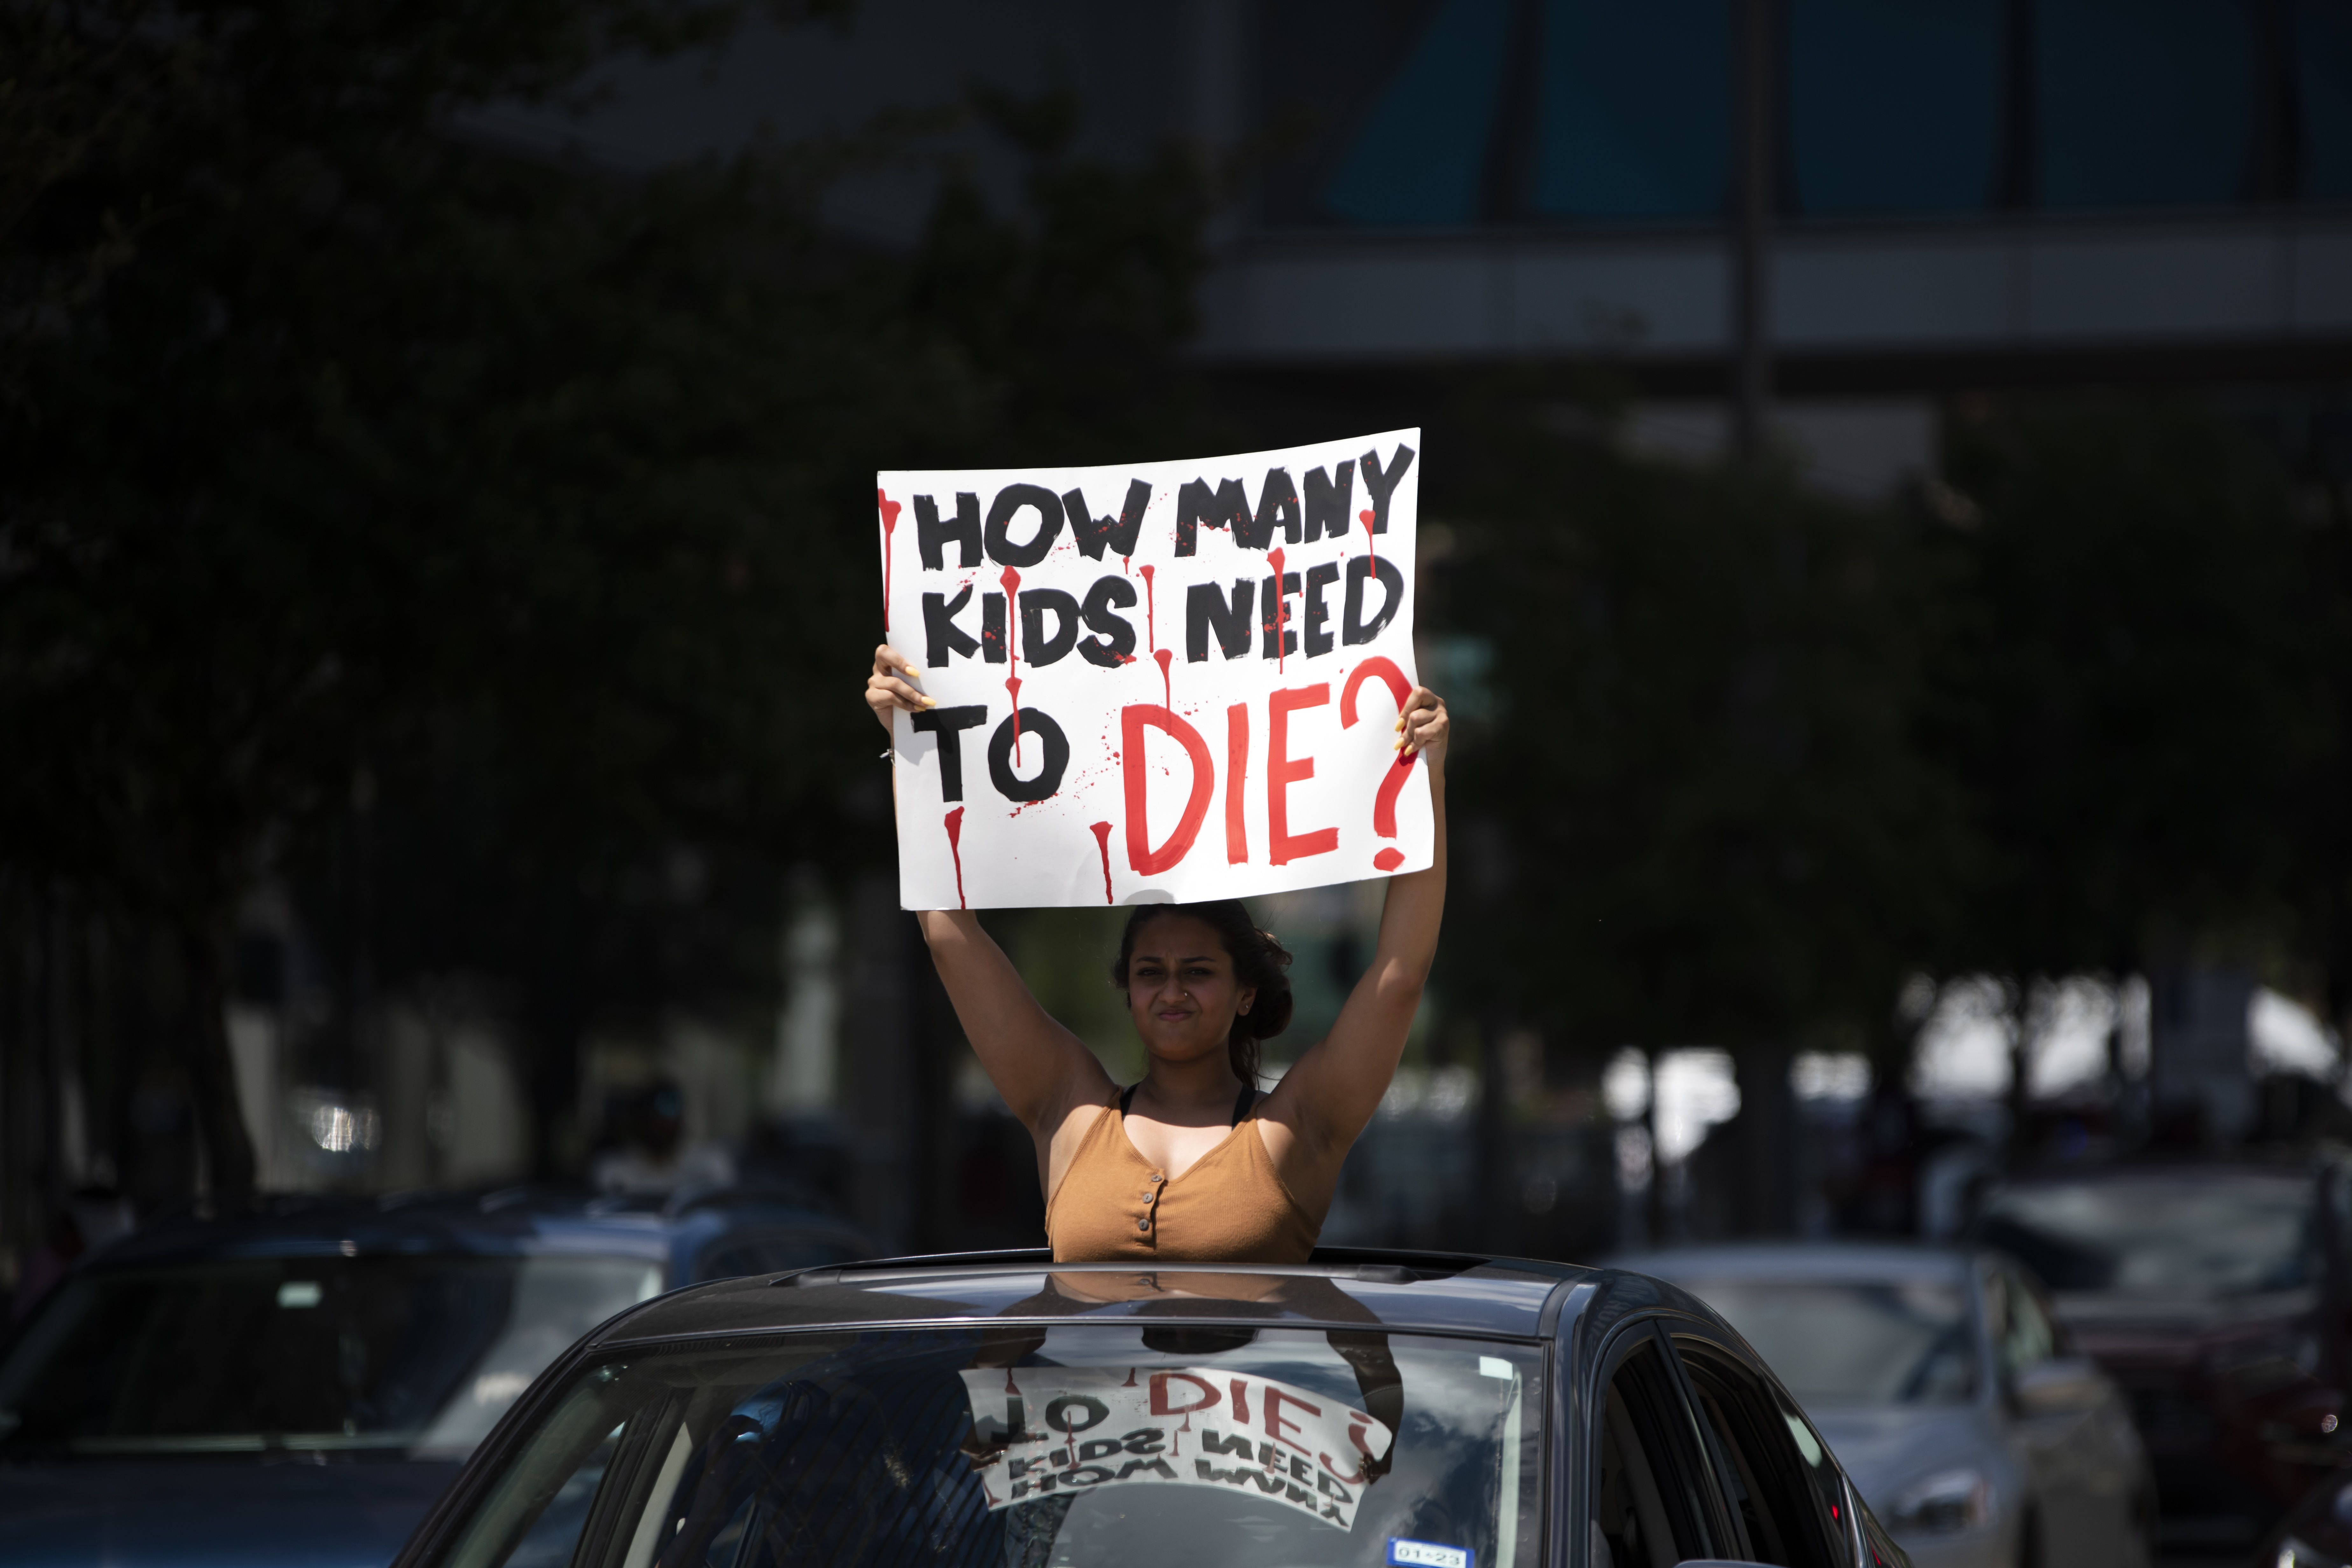 Photo of a person standing in a convertible car with a sign that says "How many kids need to die?"